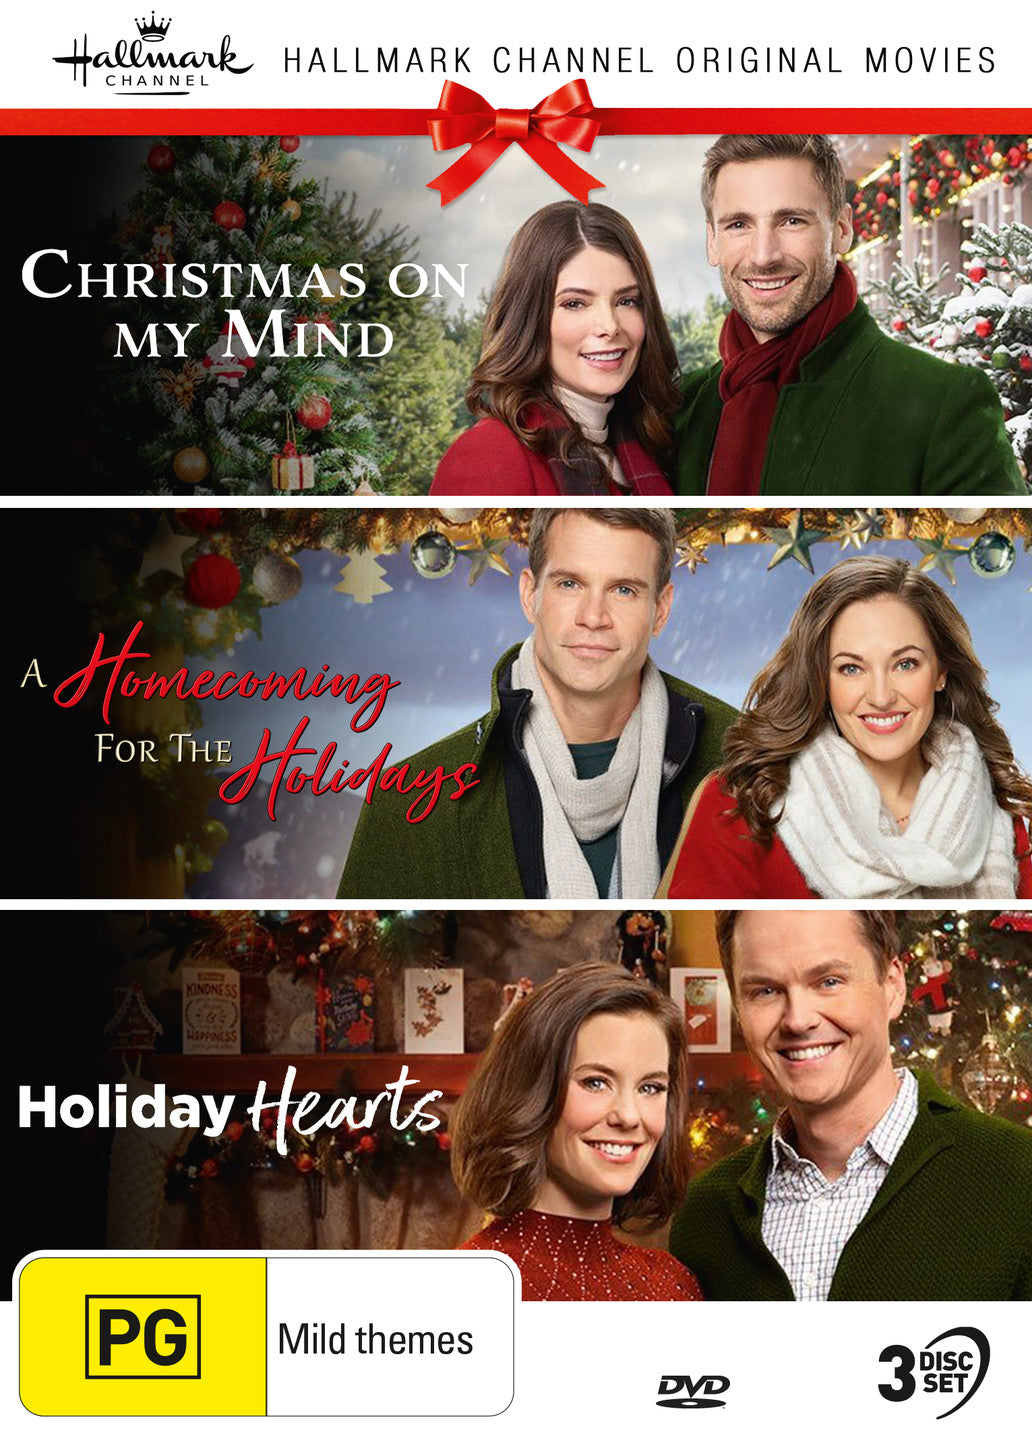 HALLMARK CHRISTMAS COLLECTION 20 - CHRISTMAS ON MY MIND / A HOMECOMING FOR THE HOLIDAYS / HOLIDAY GEARTS